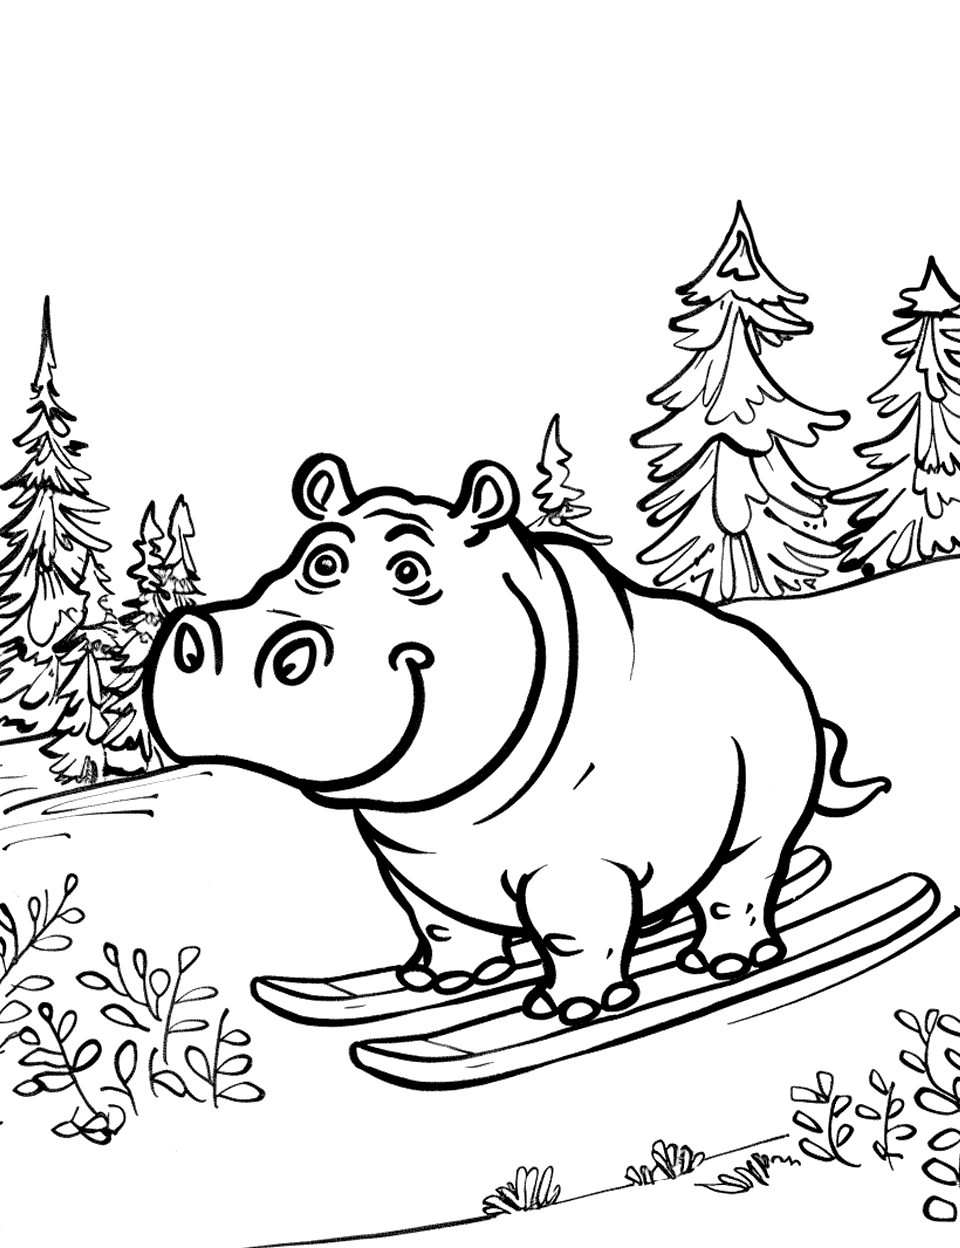 Hippo Skiing Adventure Coloring Page - A hippo skiing down a snowy mountain with pine trees in the background.